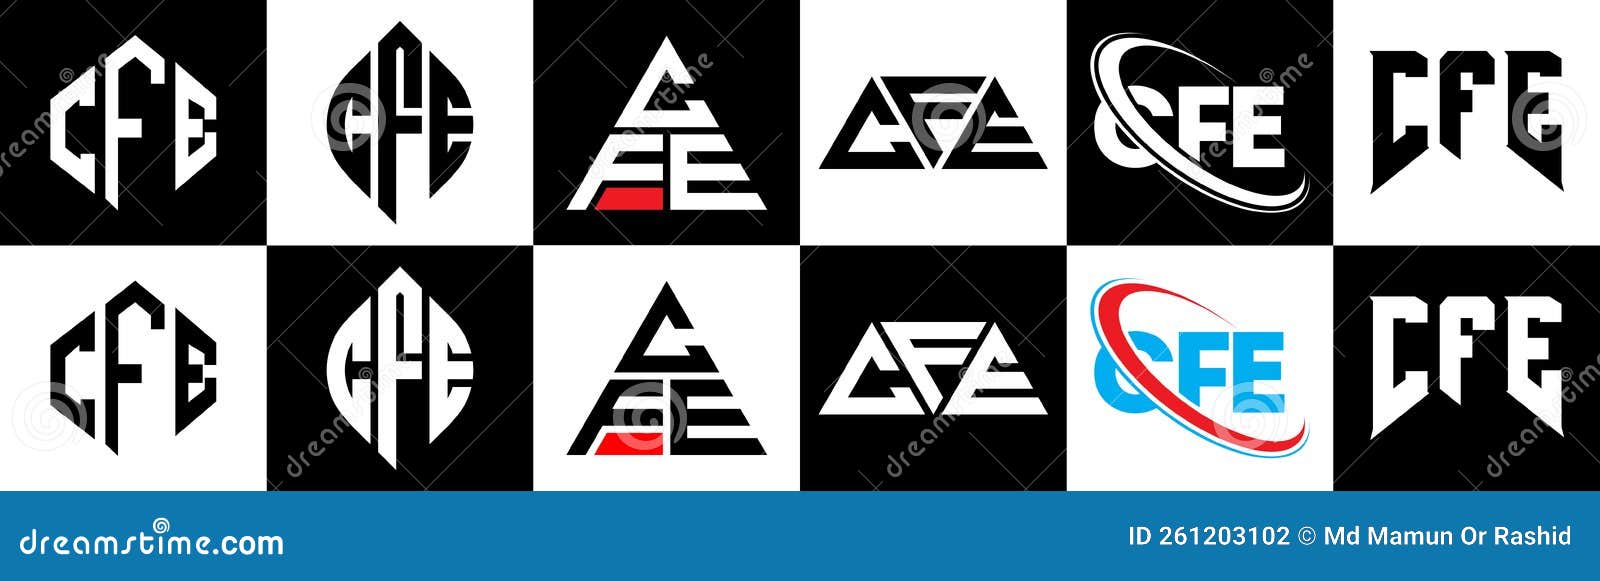 cfe letter logo  in six style. cfe polygon, circle, triangle, hexagon, flat and simple style with black and white color